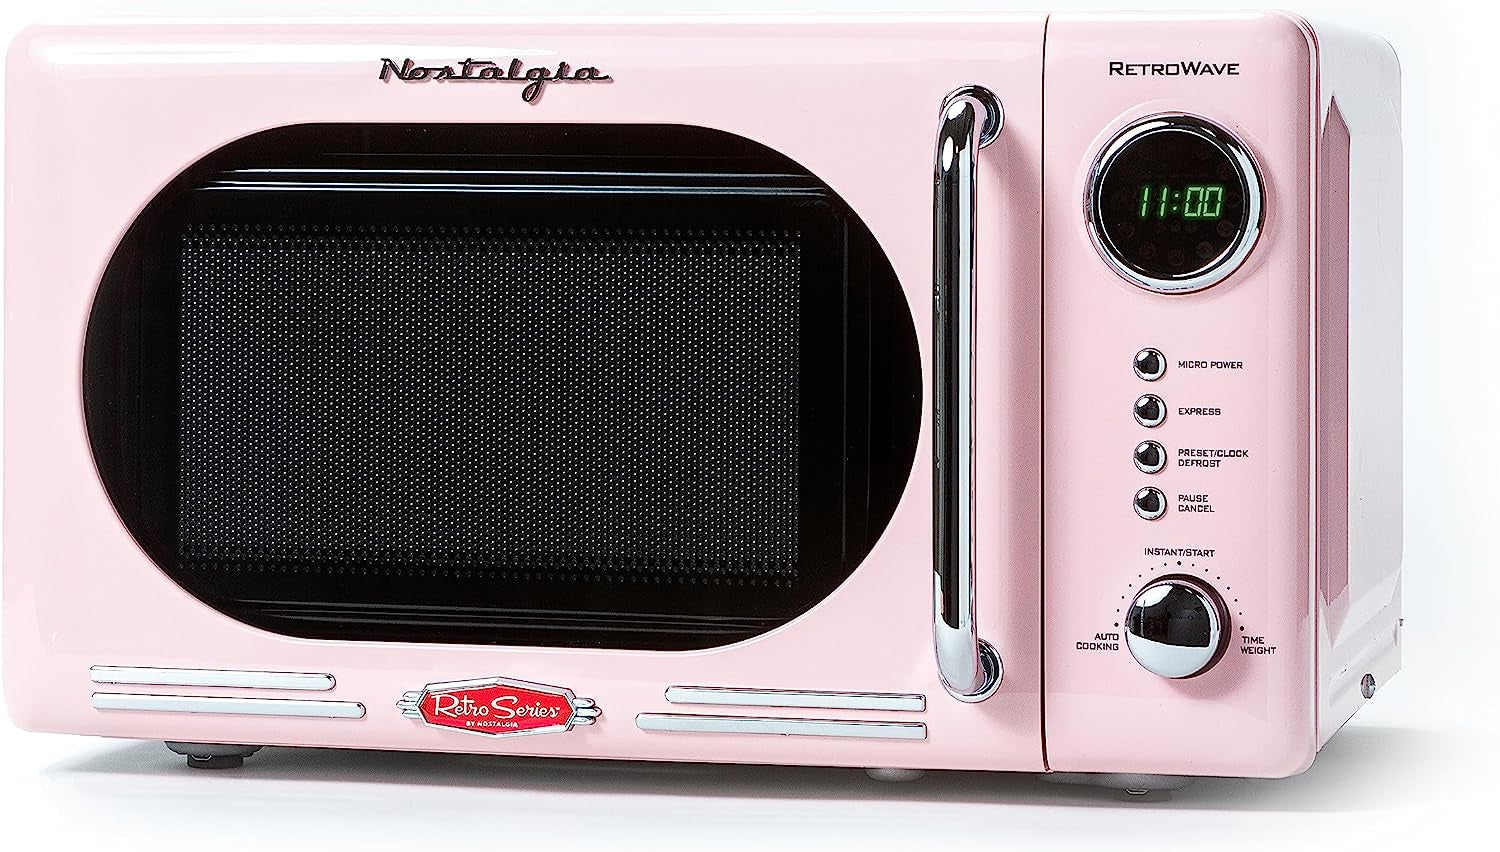 Retro Compact Countertop Microwave Oven - 0.7 Cu. Ft. - 700-Watts with LED Digital Display - Child Lock - Easy Clean Interior - Pink